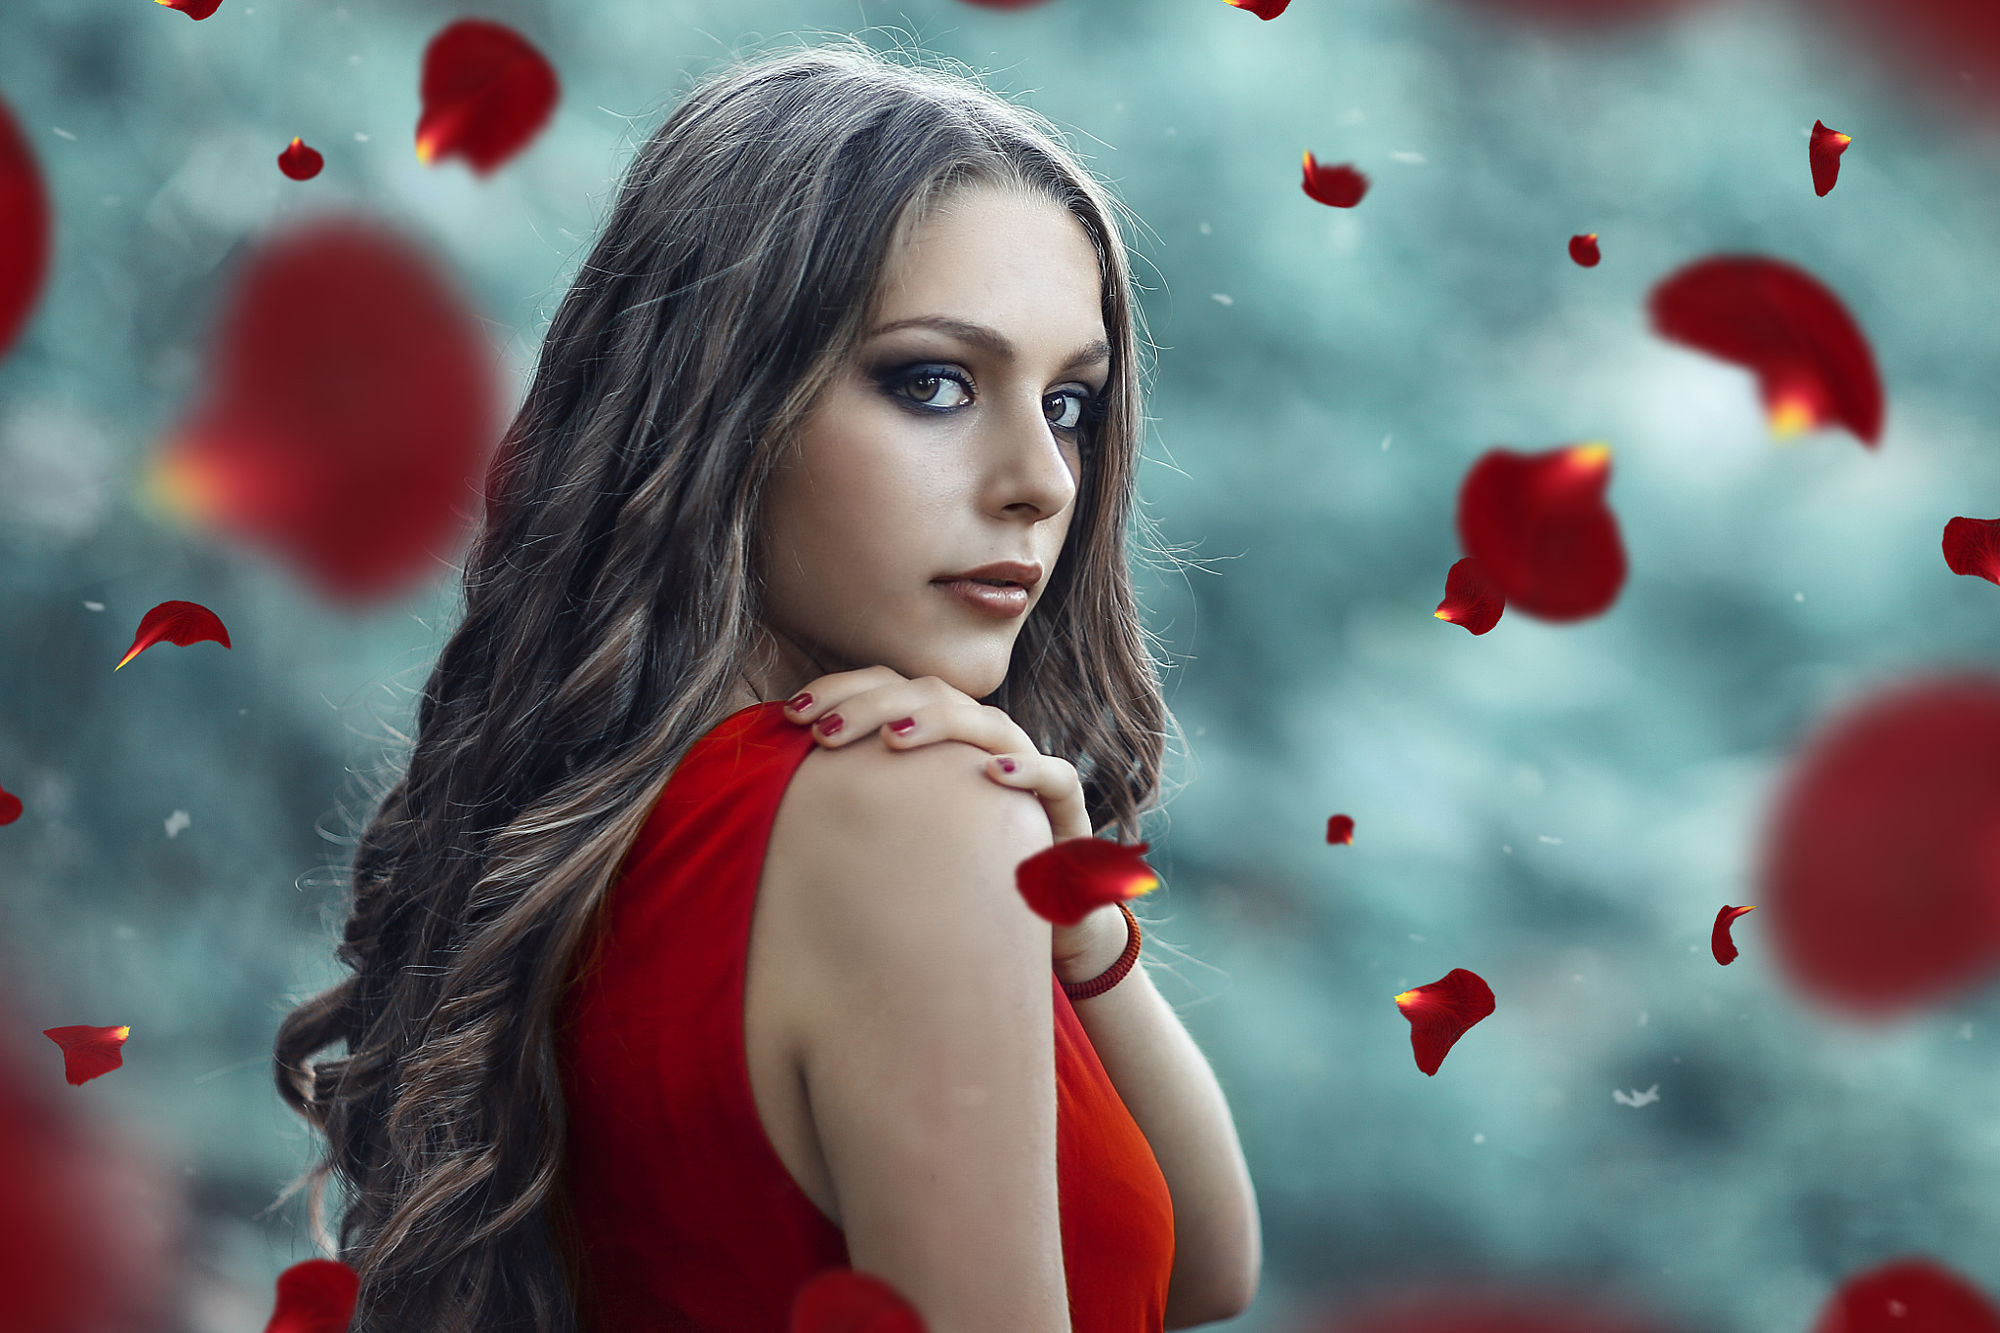 Women Brunette Long Hair Curly Hair Petals Red Clothing Dress Portrait Alessandro Di Cicco Wind 2000x1333